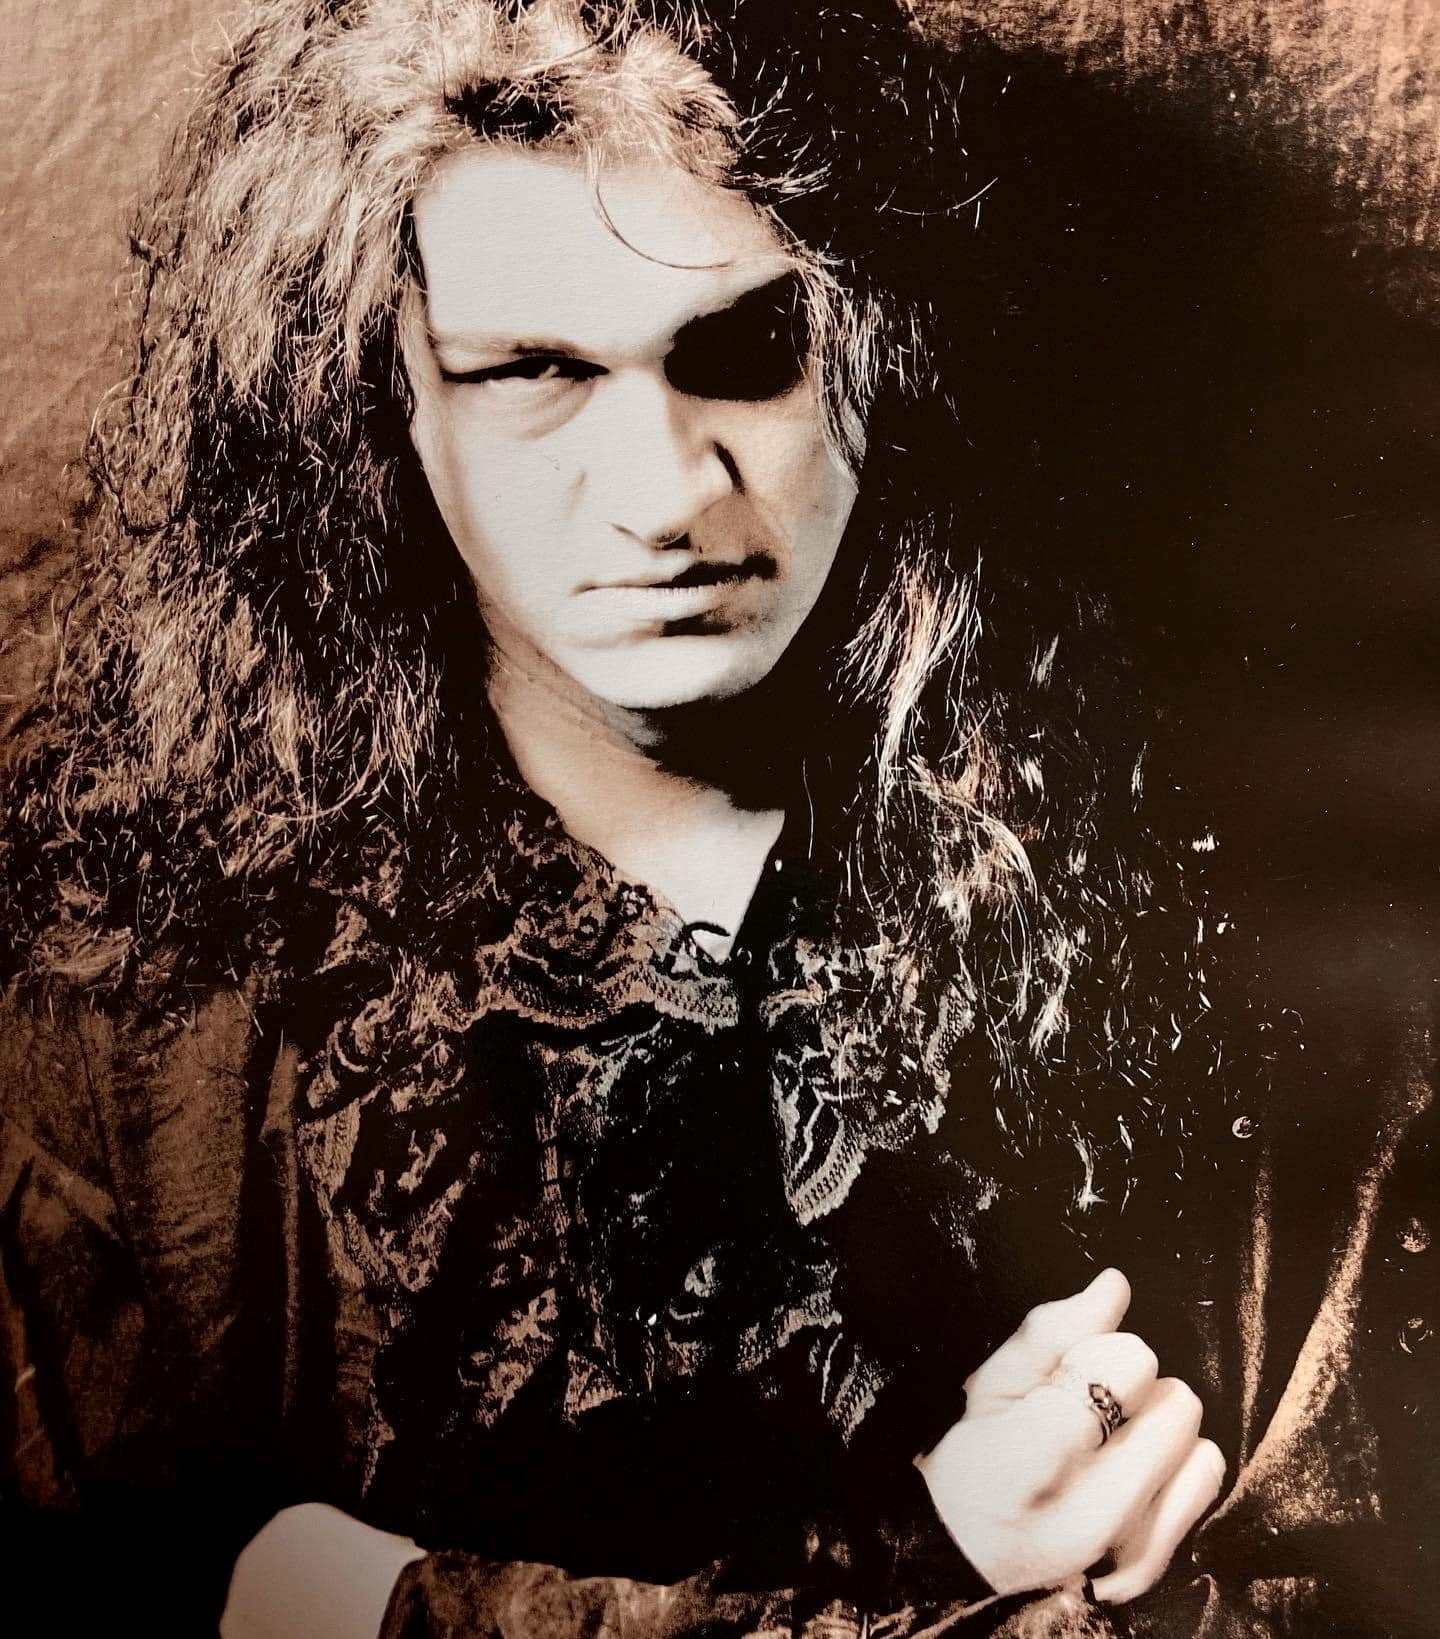 You are currently viewing Morre Stuart Anstis, ex-guitarrista do Cradle Of Filth, aos 48 anos